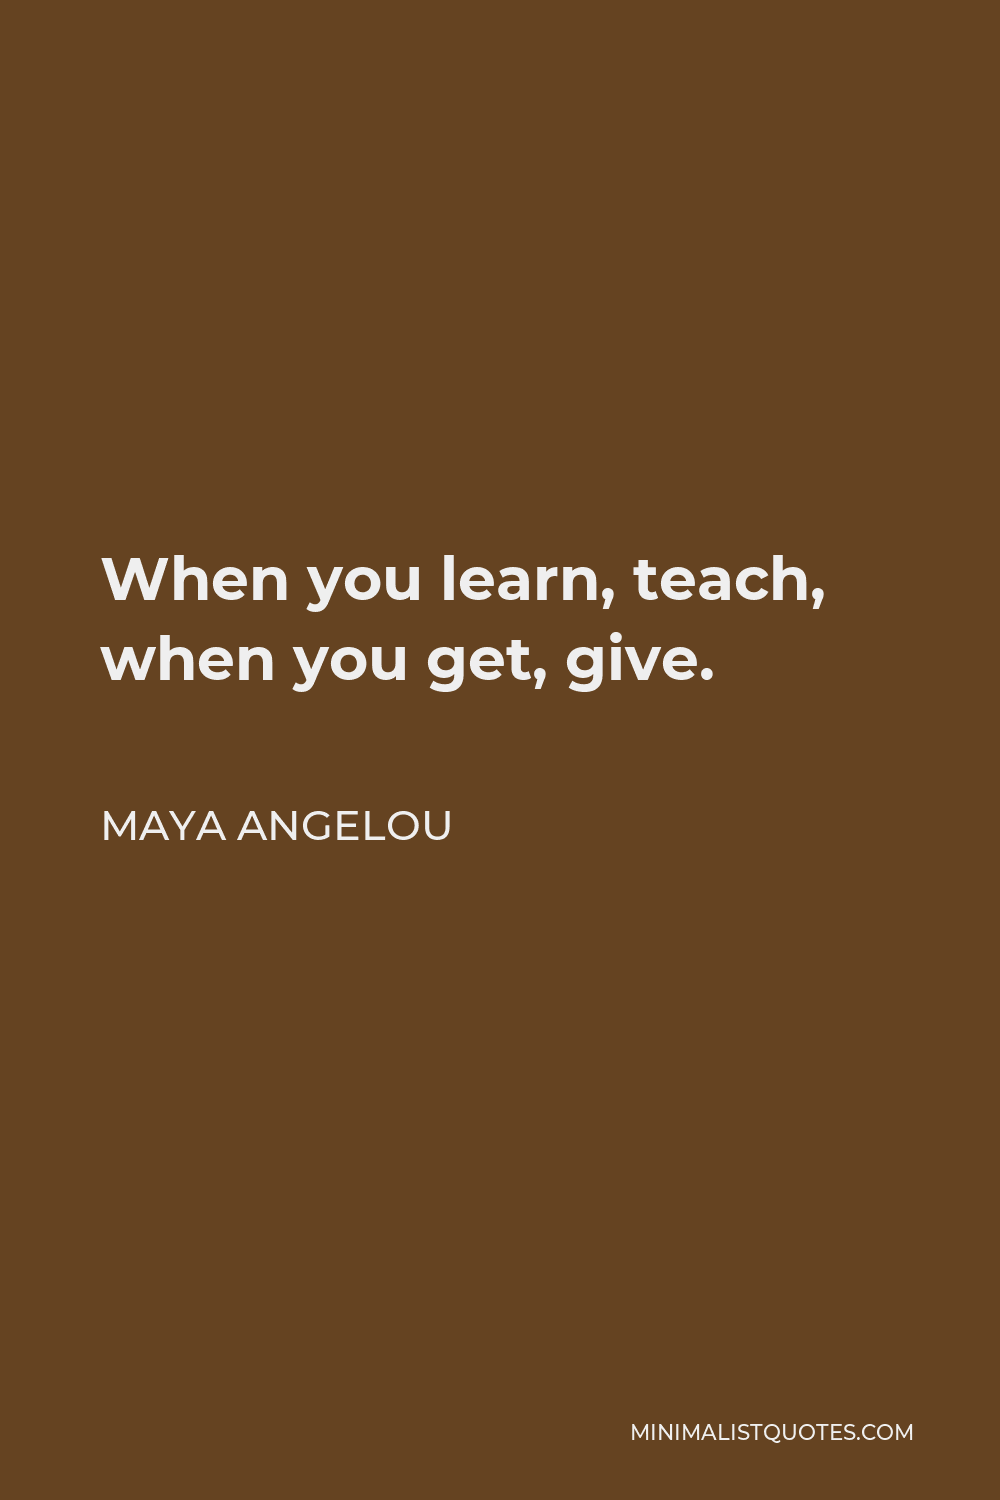 Maya Angelou Quote - When you learn, teach, when you get, give.